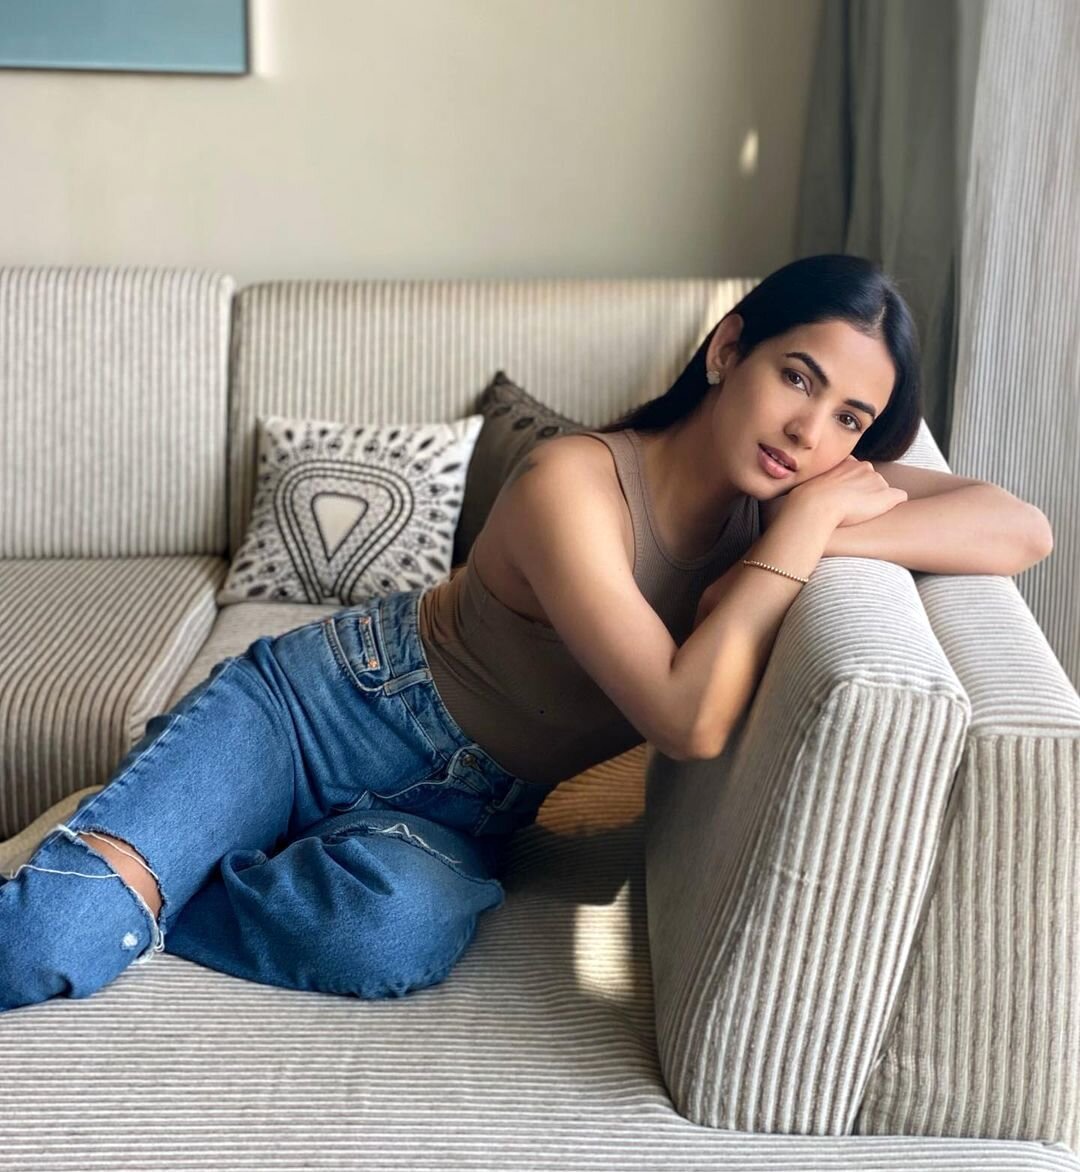 Sonal Chauhan is an Indian model, singer, and actress who predominantly works in Telugu and Hindi cinema. She has won beauty contests and made her debut as an actress in the movie Jannat. Born: May 16, 1987 (age 34 years), New Delhi, India Height: 1.65 m Her Body Figure  34-26-34.